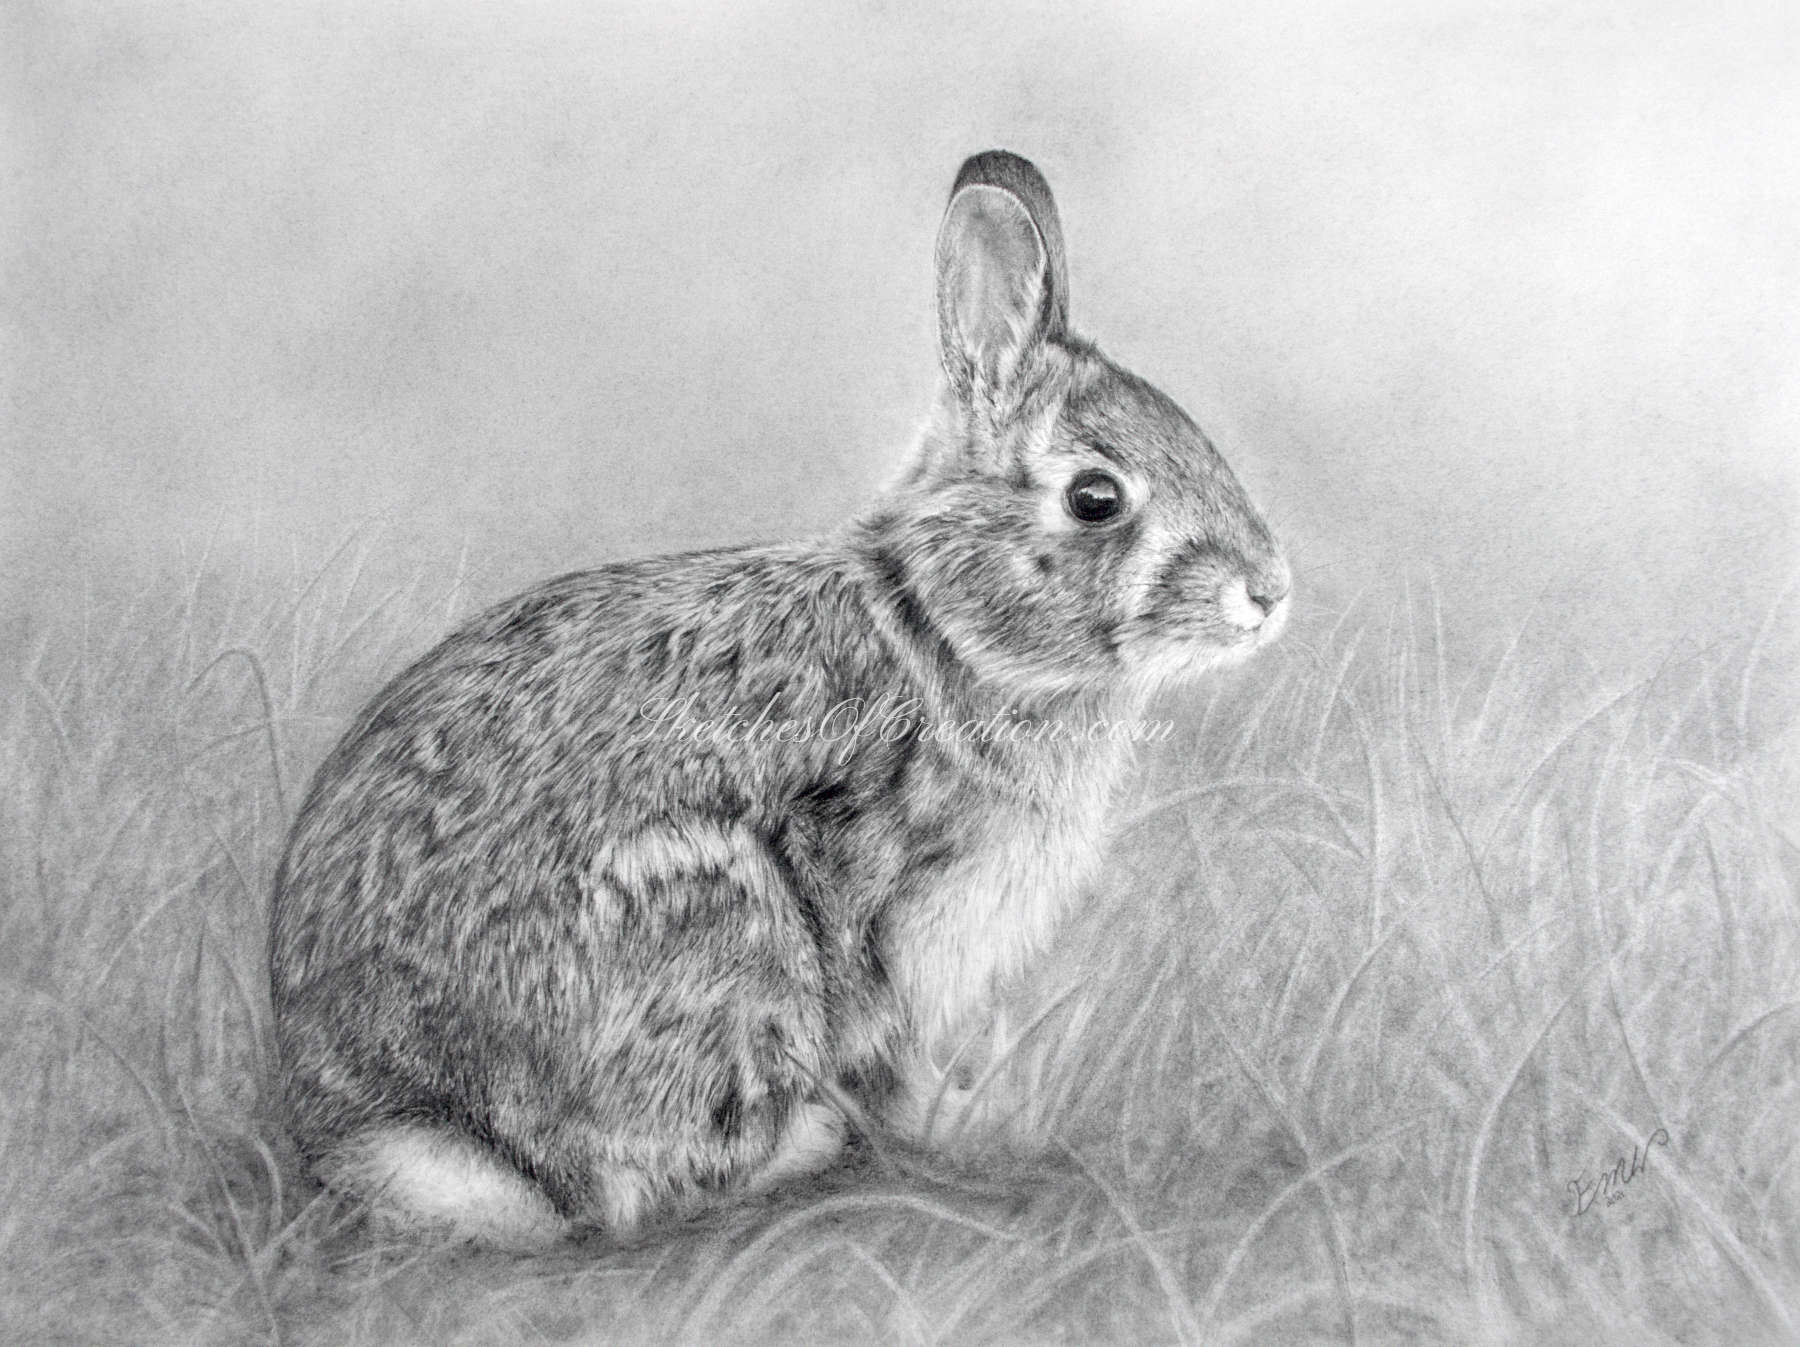 'Rabbit' a drawing of a Rabbit. approximately 9x12 inches. Completed April 2021